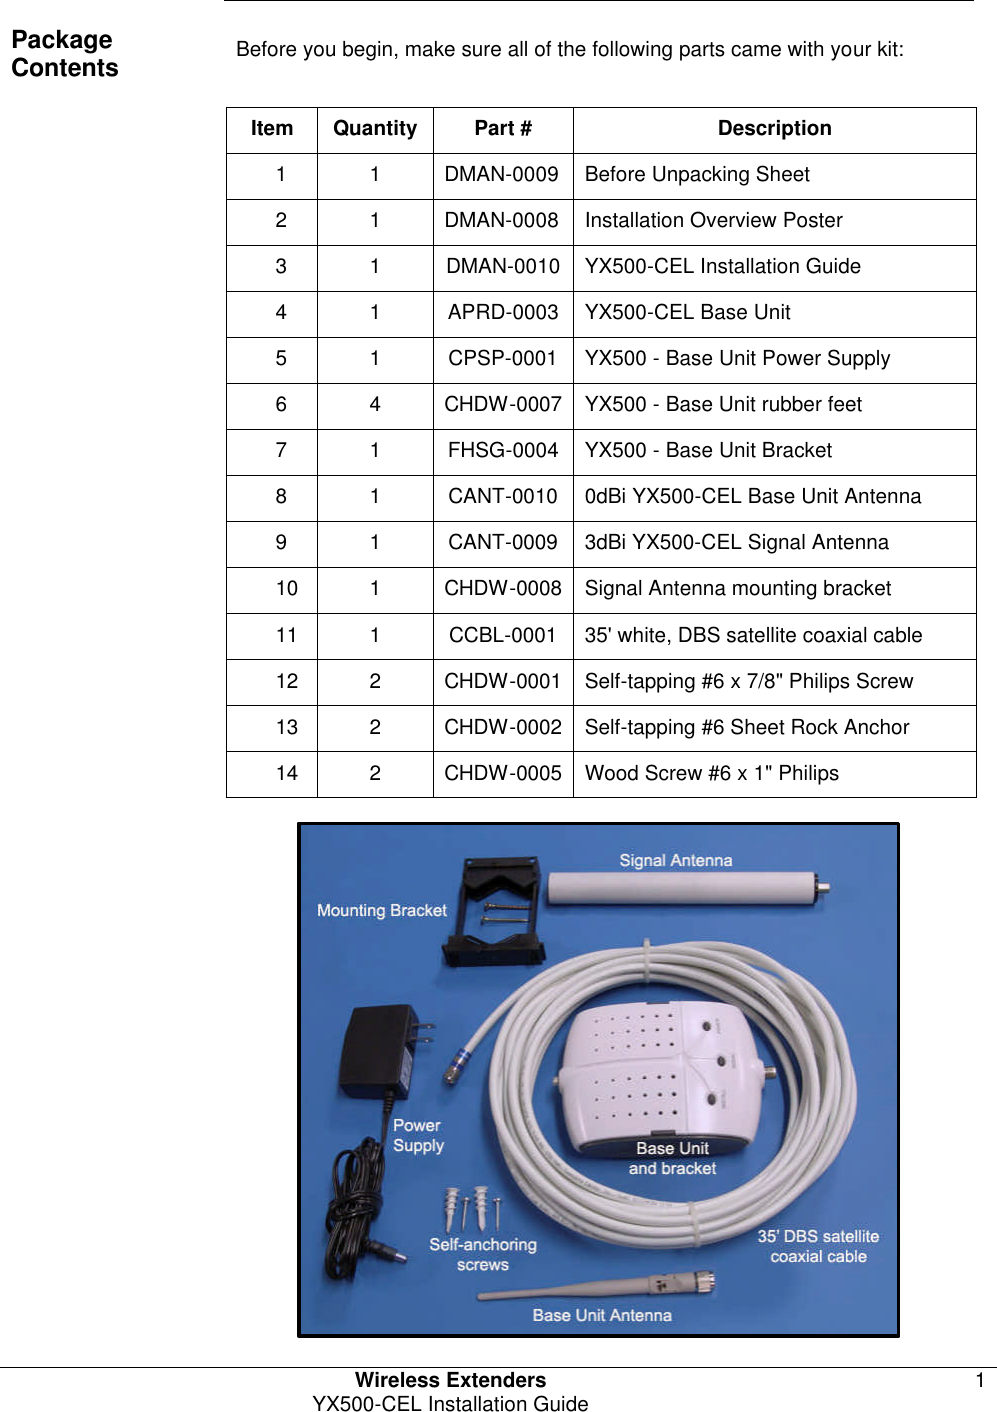   Wireless Extenders 1 YX500-CEL Installation Guide        Package Contents Before you begin, make sure all of the following parts came with your kit:  Item Quantity Part # Description 1  1 DMAN-0009 Before Unpacking Sheet 2  1 DMAN-0008 Installation Overview Poster 3  1 DMAN-0010 YX500-CEL Installation Guide 4  1 APRD-0003 YX500-CEL Base Unit 5  1 CPSP-0001  YX500 - Base Unit Power Supply 6  4 CHDW-0007 YX500 - Base Unit rubber feet 7  1 FHSG-0004 YX500 - Base Unit Bracket 8  1 CANT-0010 0dBi YX500-CEL Base Unit Antenna 9  1 CANT-0009 3dBi YX500-CEL Signal Antenna 10  1 CHDW-0008 Signal Antenna mounting bracket 11  1 CCBL-0001 35&apos; white, DBS satellite coaxial cable 12  2 CHDW-0001 Self-tapping #6 x 7/8&quot; Philips Screw 13  2 CHDW-0002 Self-tapping #6 Sheet Rock Anchor 14  2 CHDW-0005 Wood Screw #6 x 1&quot; Philips  